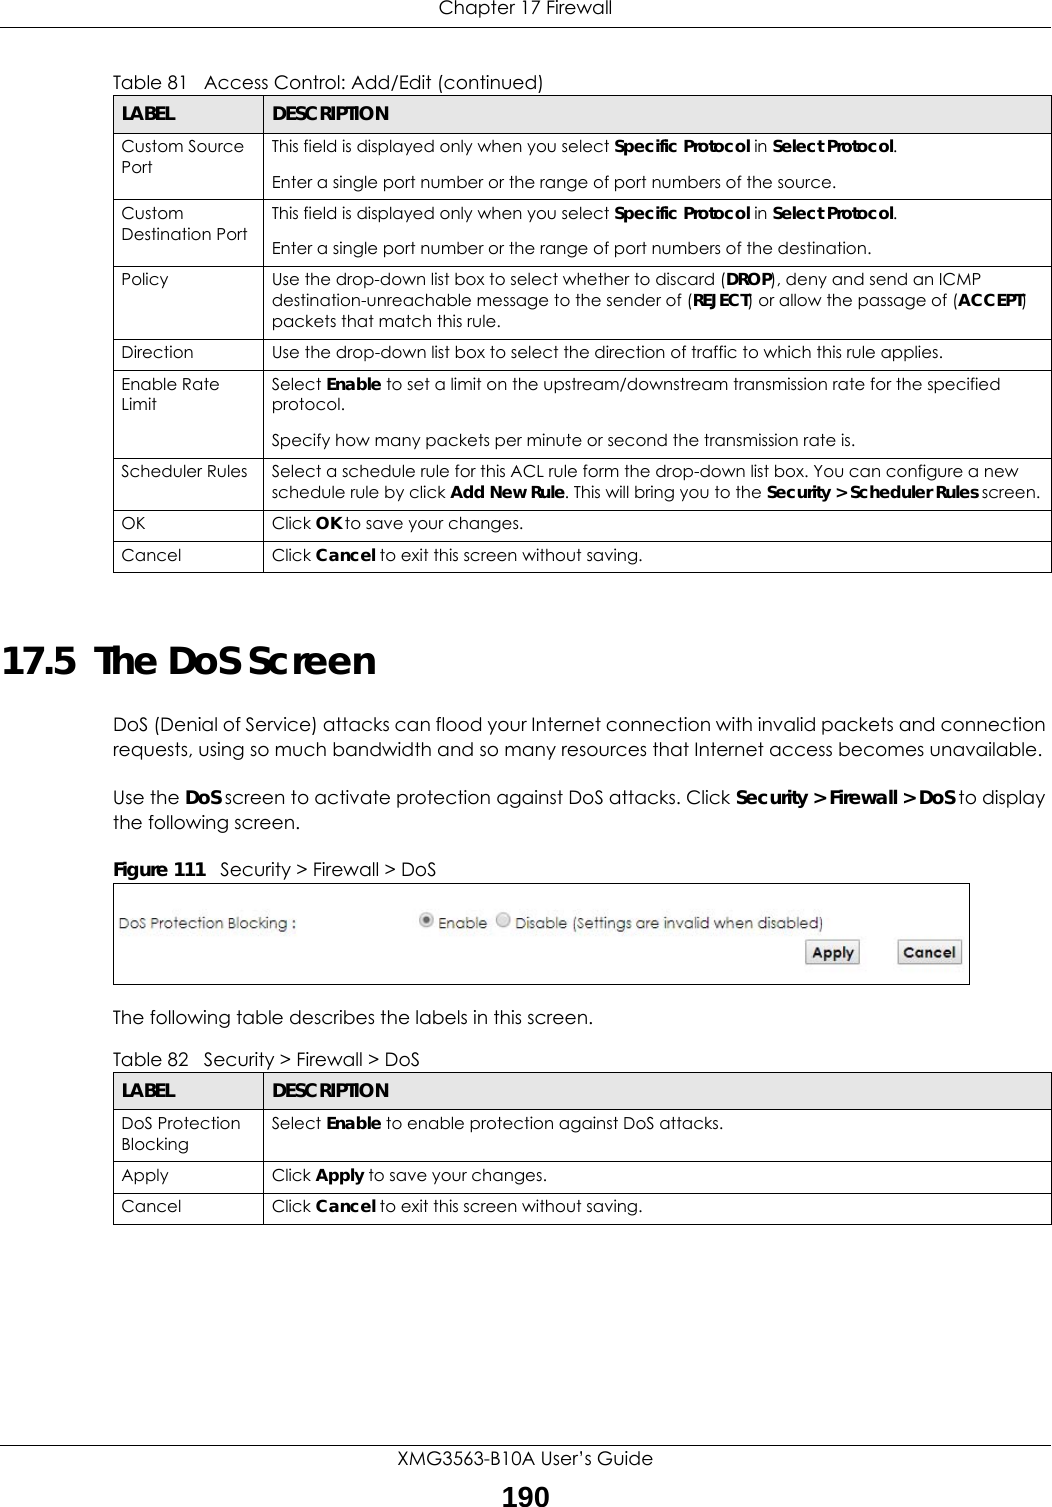 Chapter 17 FirewallXMG3563-B10A User’s Guide19017.5  The DoS ScreenDoS (Denial of Service) attacks can flood your Internet connection with invalid packets and connection requests, using so much bandwidth and so many resources that Internet access becomes unavailable. Use the DoS screen to activate protection against DoS attacks. Click Security &gt; Firewall &gt; DoS to display the following screen. Figure 111   Security &gt; Firewall &gt; DoSThe following table describes the labels in this screen. Custom Source PortThis field is displayed only when you select Specific Protocol in Select Protocol.Enter a single port number or the range of port numbers of the source.Custom Destination PortThis field is displayed only when you select Specific Protocol in Select Protocol.Enter a single port number or the range of port numbers of the destination.Policy Use the drop-down list box to select whether to discard (DROP), deny and send an ICMP destination-unreachable message to the sender of (REJECT) or allow the passage of (ACCEPT) packets that match this rule.Direction  Use the drop-down list box to select the direction of traffic to which this rule applies.Enable Rate LimitSelect Enable to set a limit on the upstream/downstream transmission rate for the specified protocol.Specify how many packets per minute or second the transmission rate is.Scheduler Rules Select a schedule rule for this ACL rule form the drop-down list box. You can configure a new schedule rule by click Add New Rule. This will bring you to the Security &gt; Scheduler Rules screen.OK Click OK to save your changes.Cancel Click Cancel to exit this screen without saving.Table 81   Access Control: Add/Edit (continued)LABEL DESCRIPTIONTable 82   Security &gt; Firewall &gt; DoSLABEL DESCRIPTIONDoS Protection BlockingSelect Enable to enable protection against DoS attacks.Apply Click Apply to save your changes.Cancel Click Cancel to exit this screen without saving.